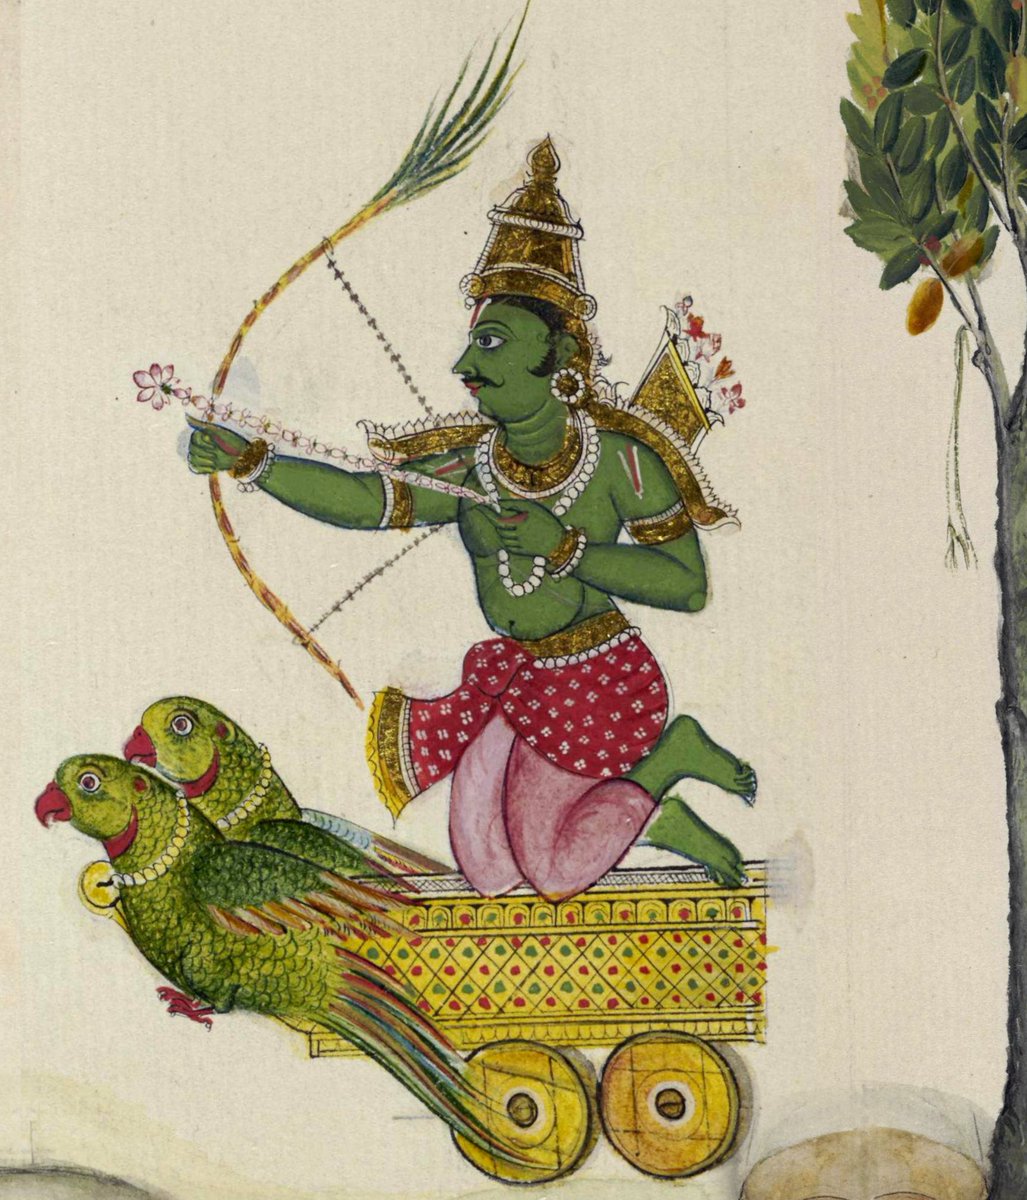 सन् १८२० का यह चित्र कौन से देव का है? Which divine being is riding the chariot in this 1820 painting?